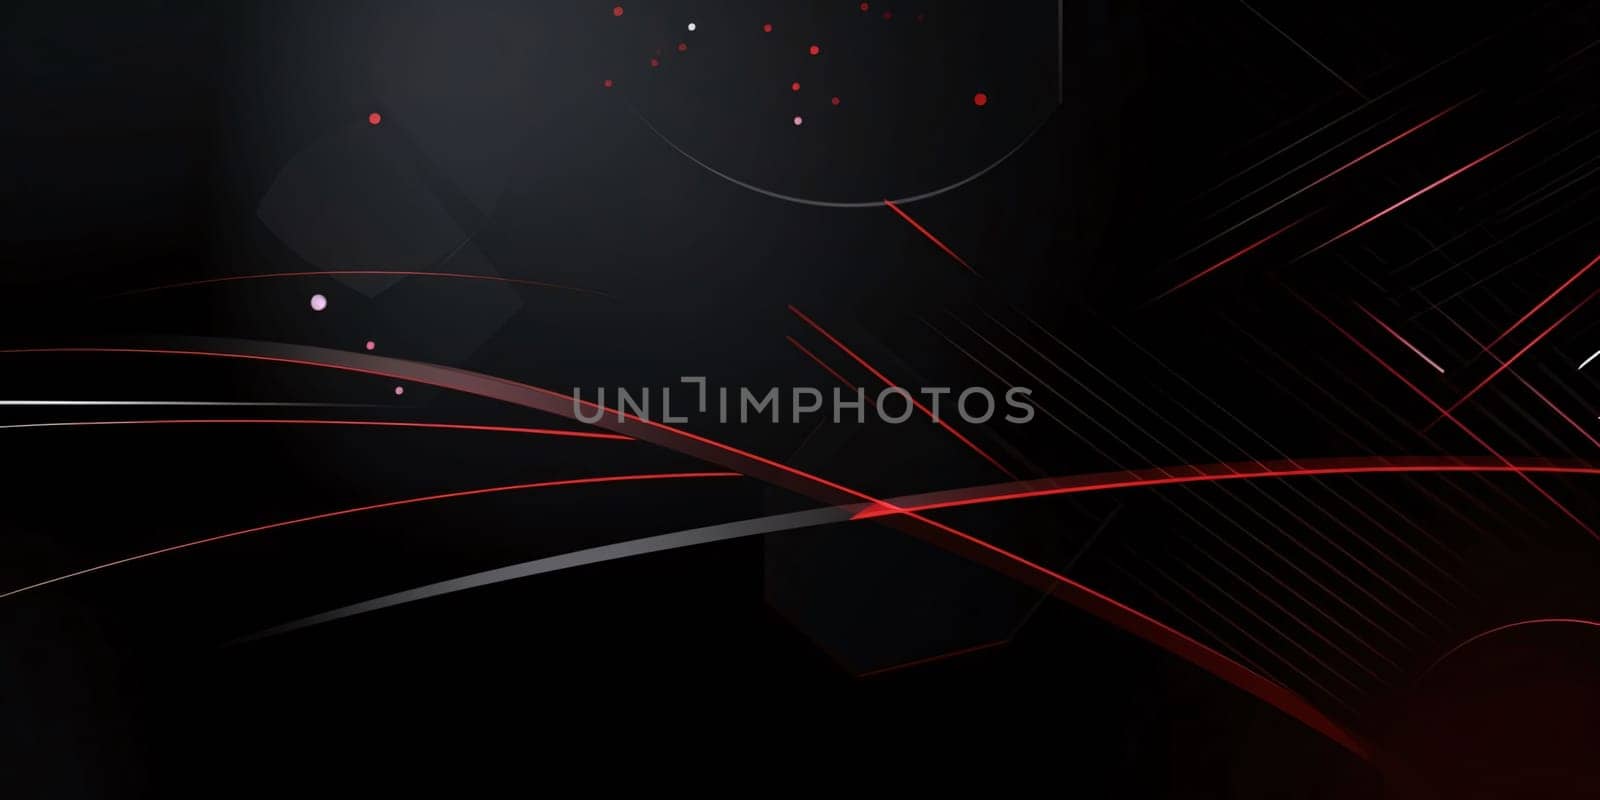 Abstract background design: Abstract background with red and black stripes. Futuristic technology style. Vector illustration